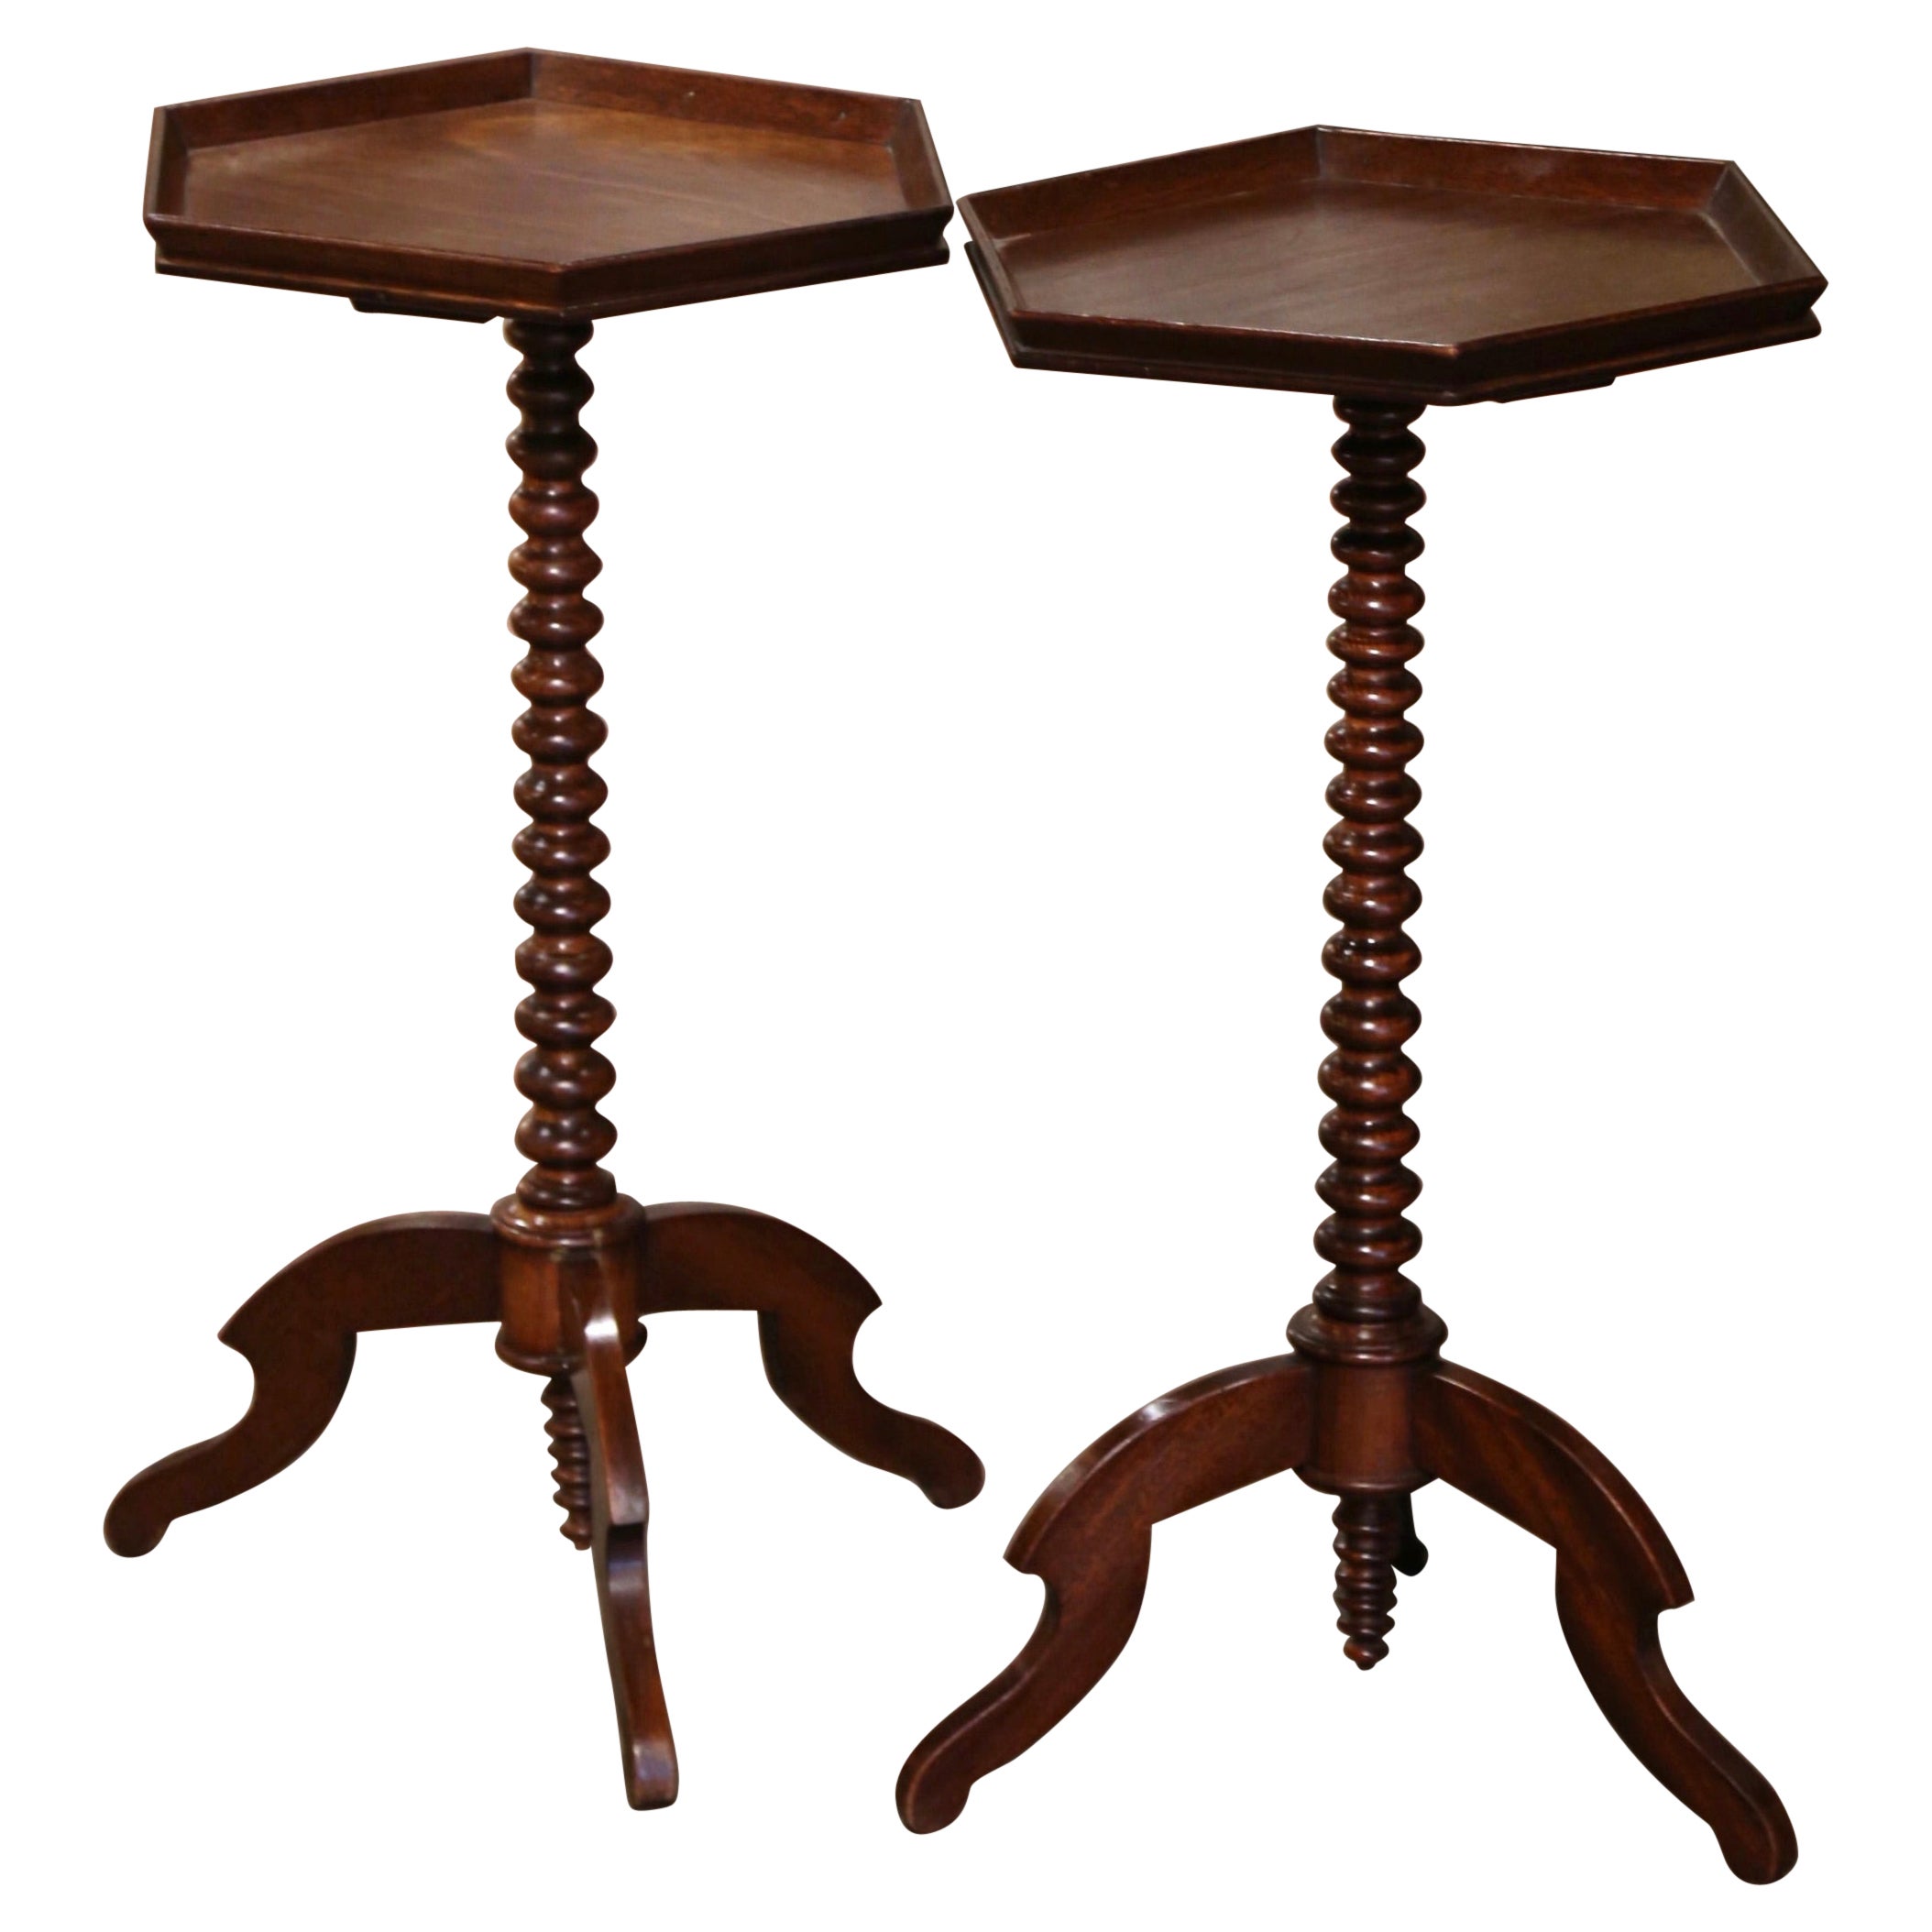 Pair of Early 20th Century English Carved Walnut Hexagonal Martini Side Tables  For Sale